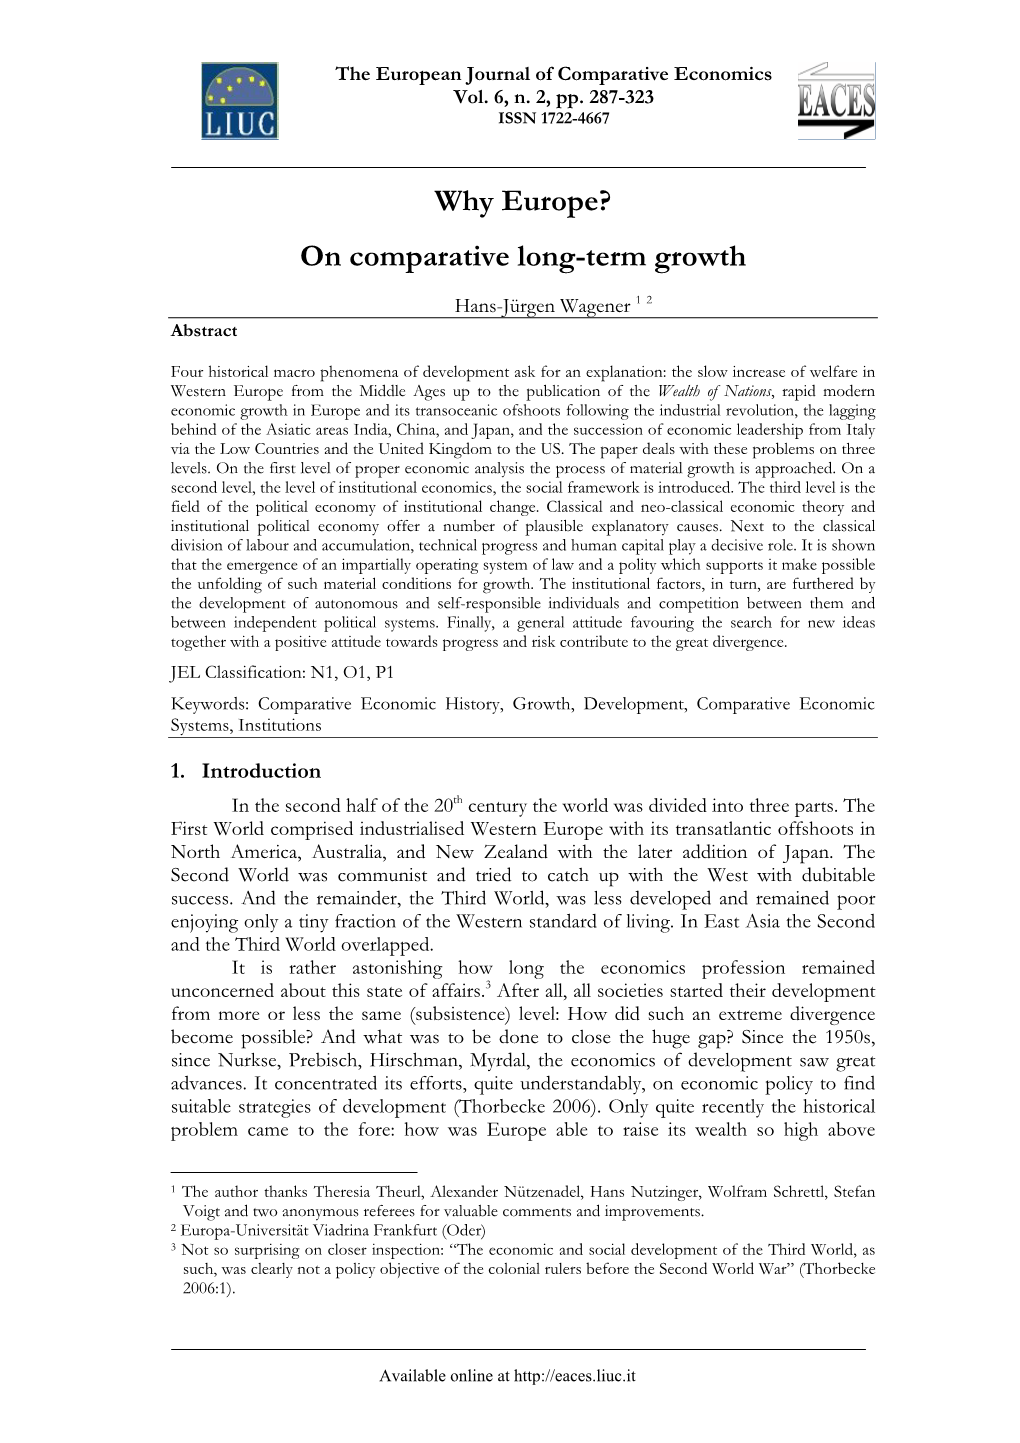 Why Europe? on Comparative Long-Term Growth